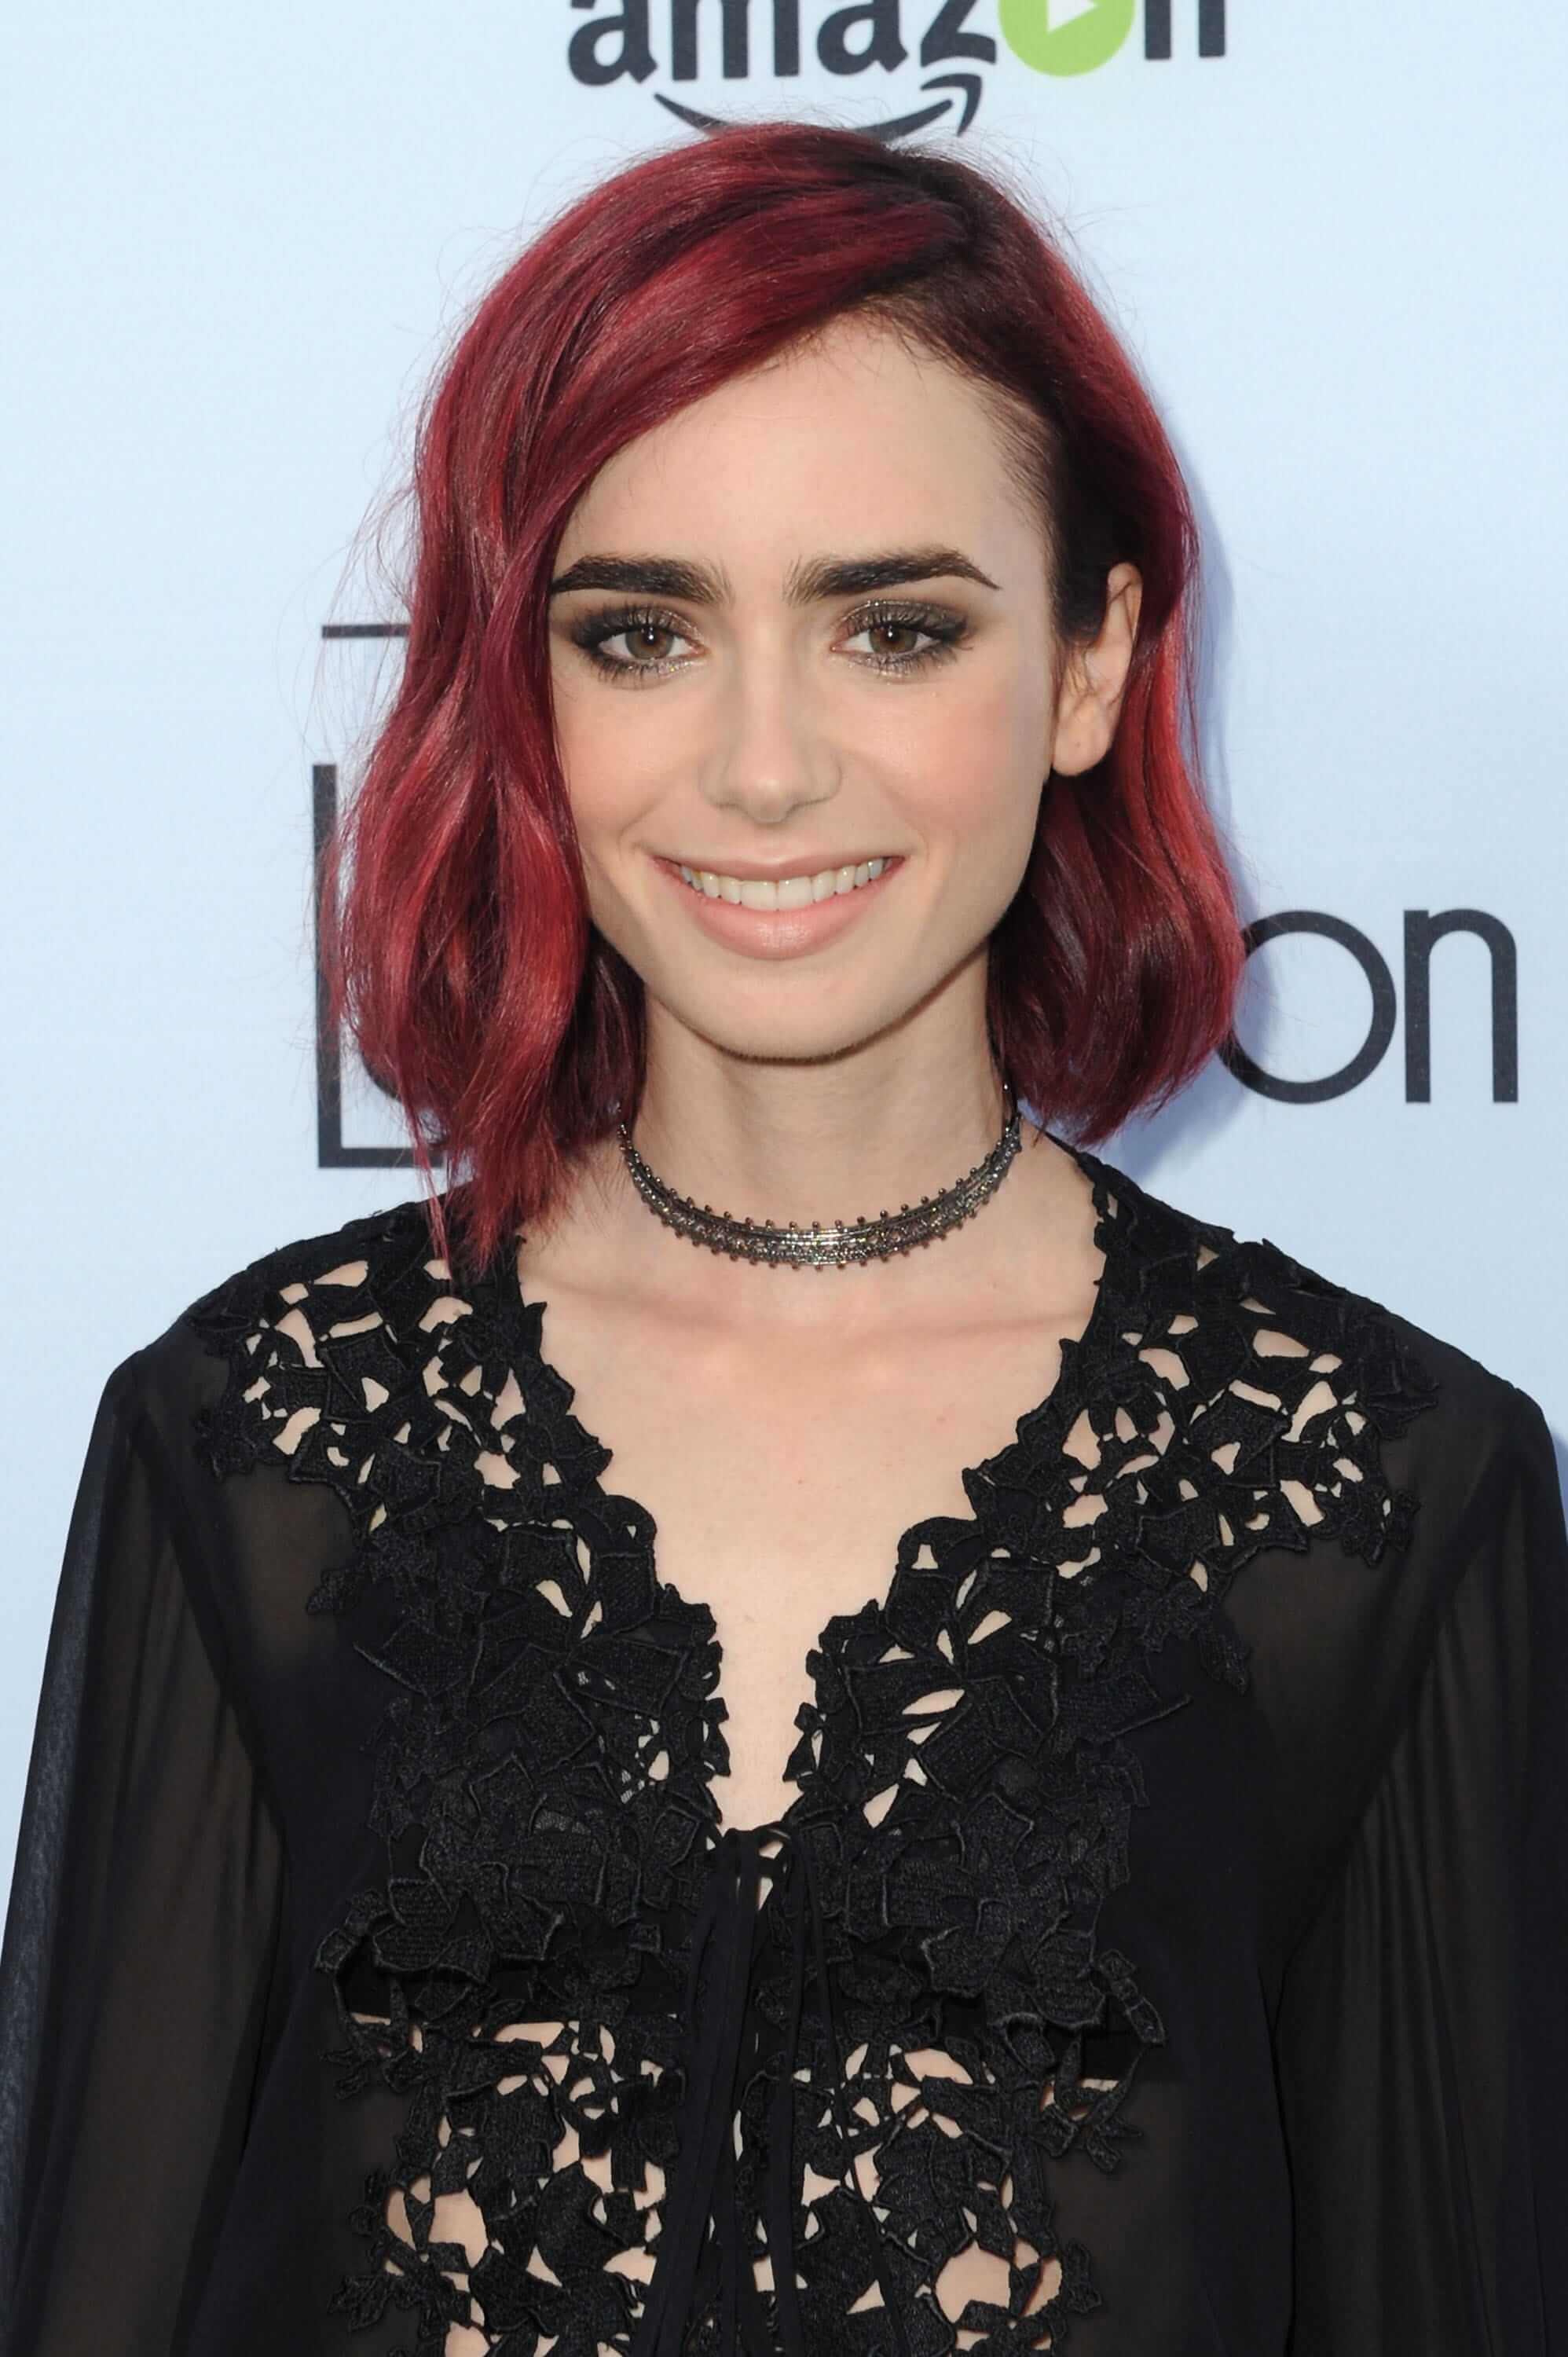 New Lily Collins Actress 2021 Wallpapers